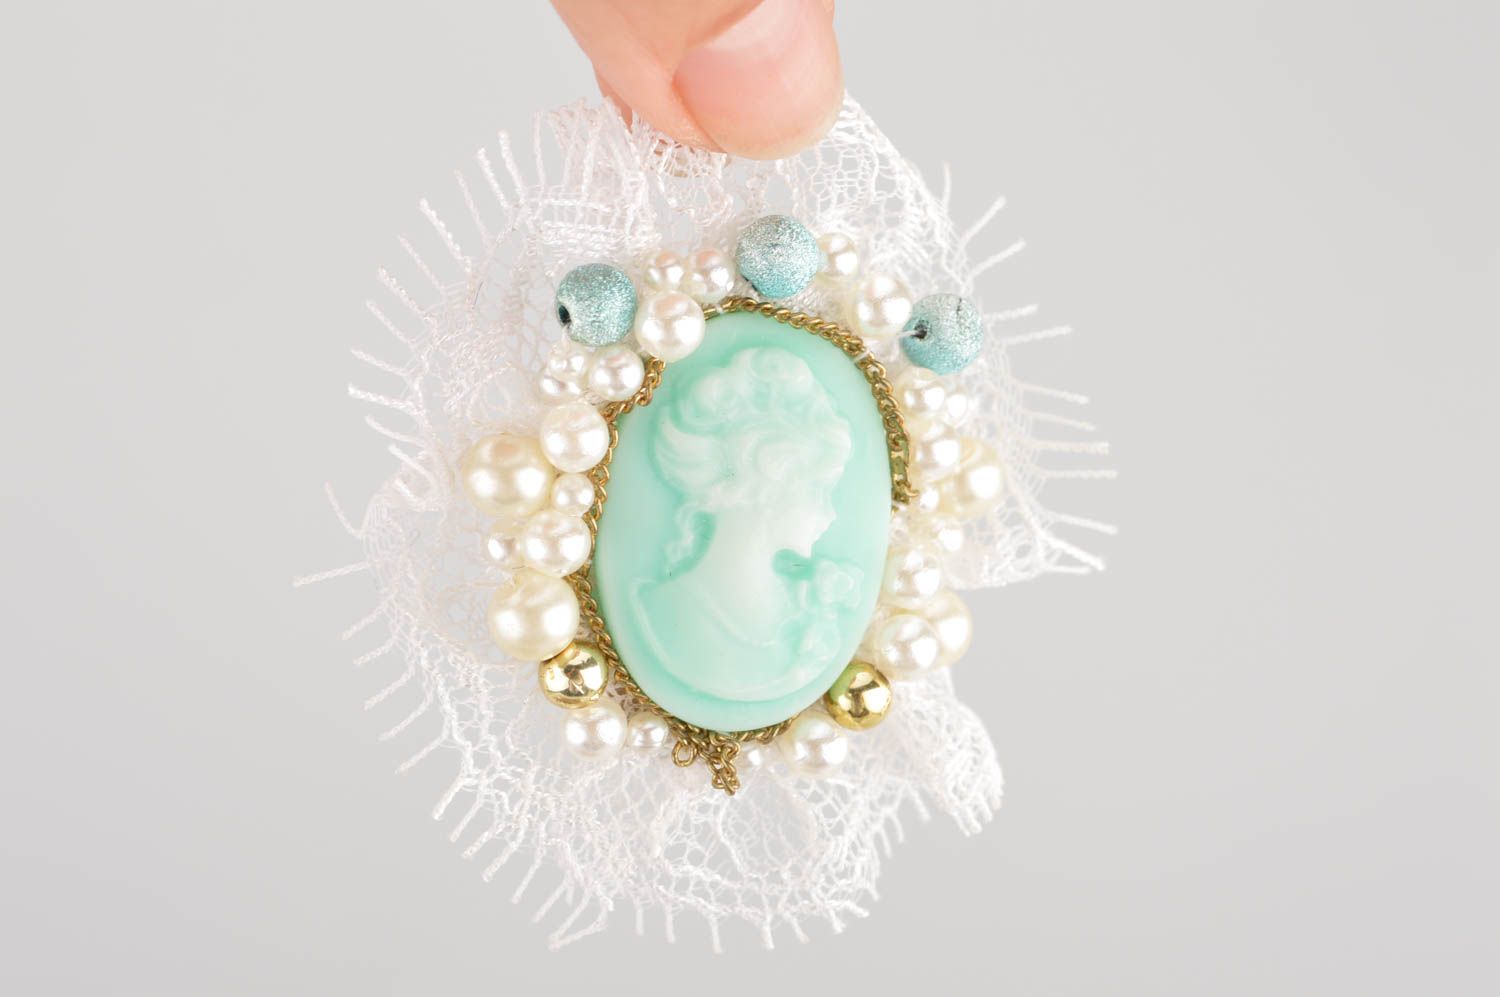 Handmade mint-colored cameo brooch with white lace accessory for women photo 3